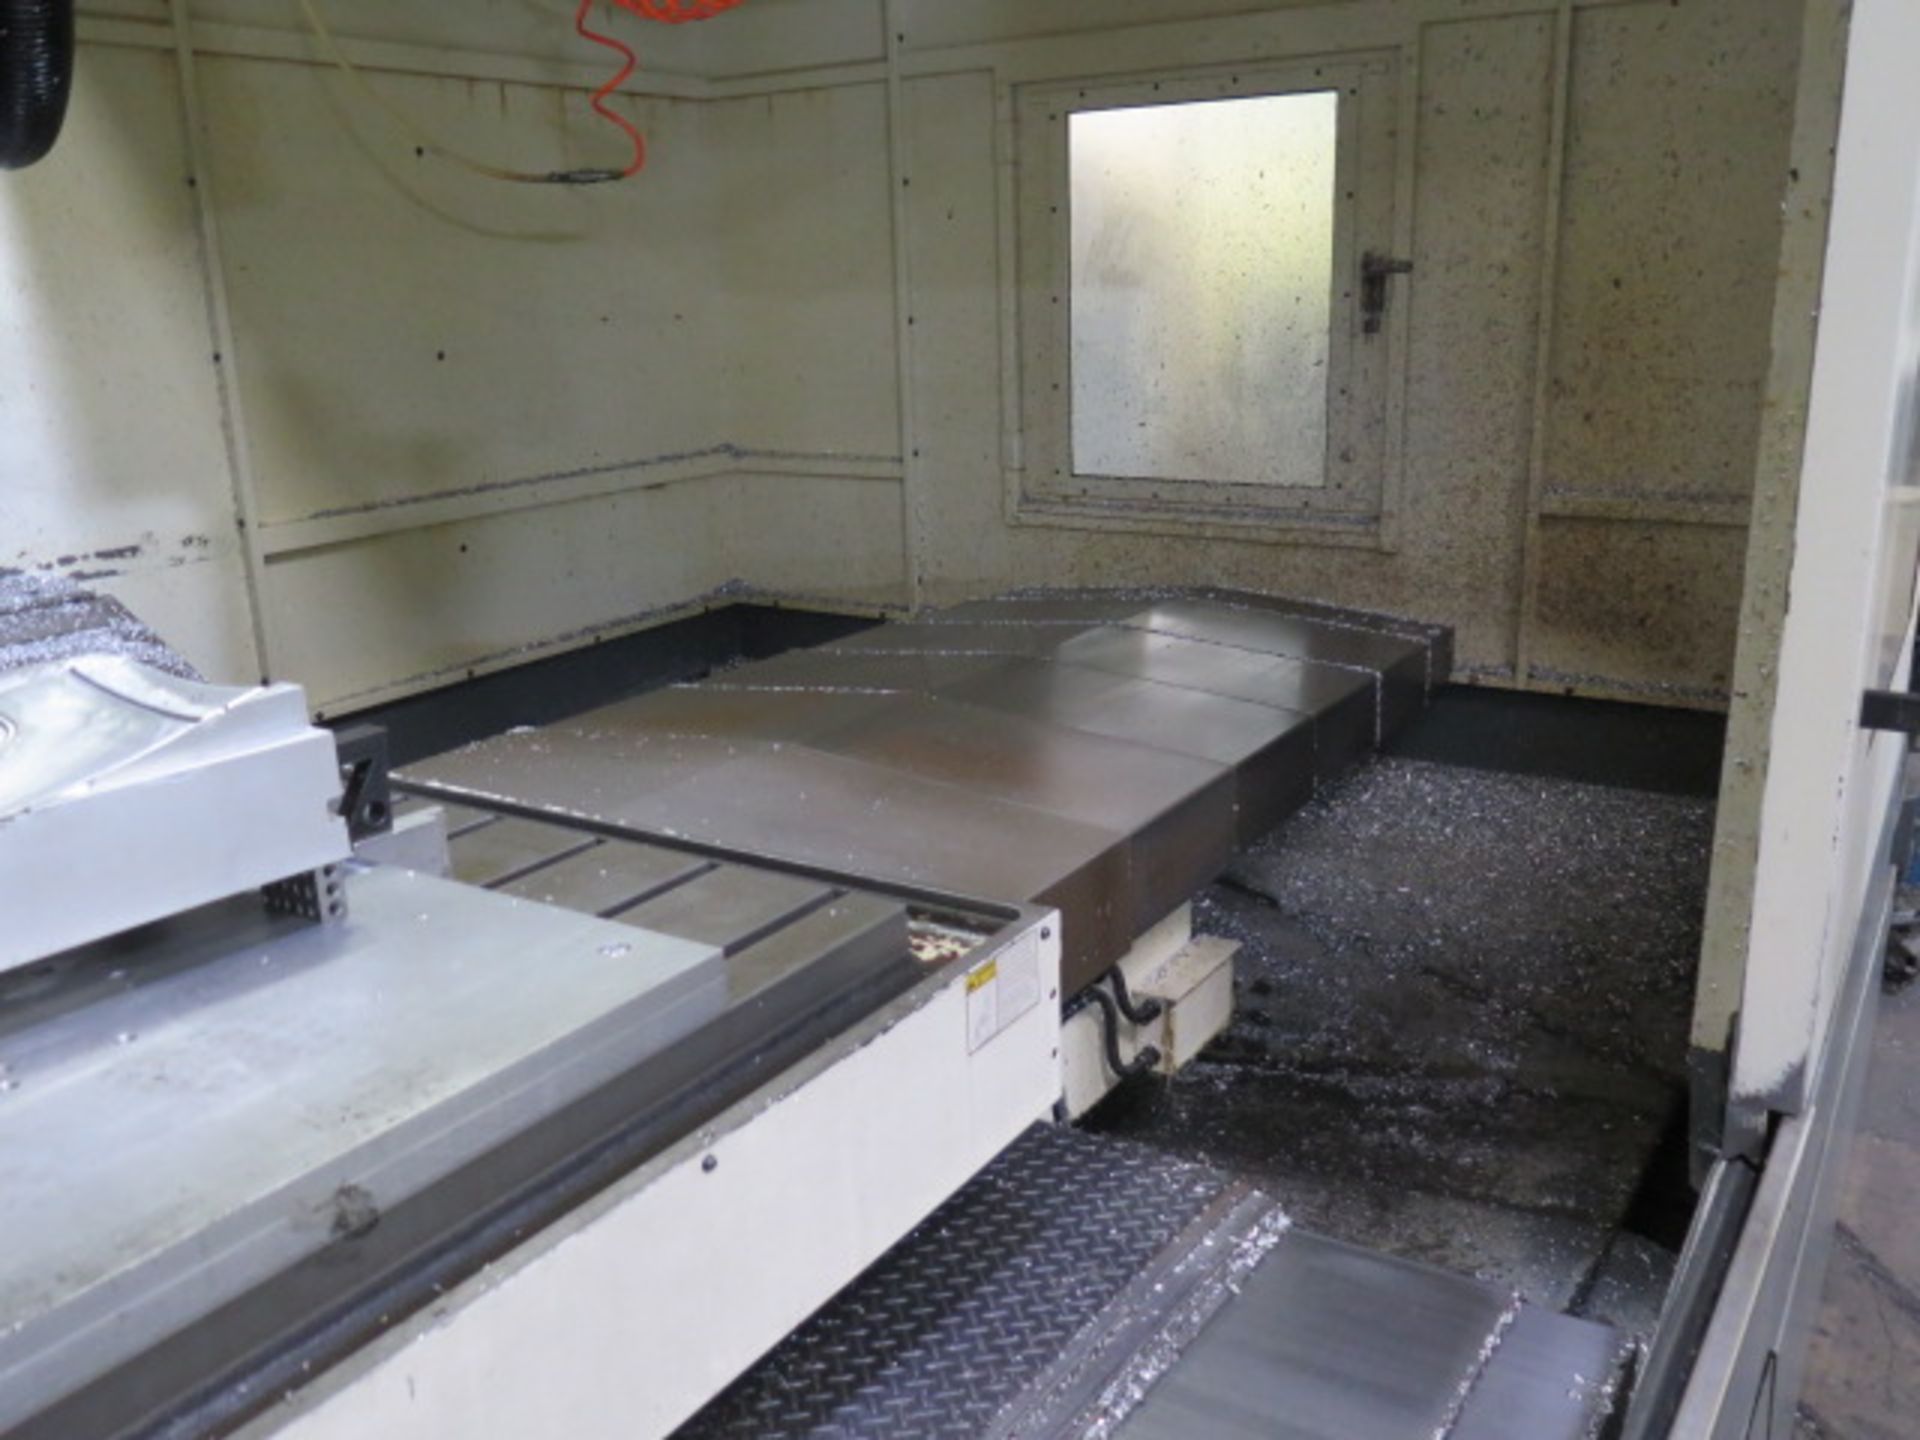 2010 Mighty Viper VMC-2100 5AB True 5-Axis CNC VMC, s/n 011795 w/ Fanuc 30i MODEL A, SOLD AS IS - Image 9 of 26